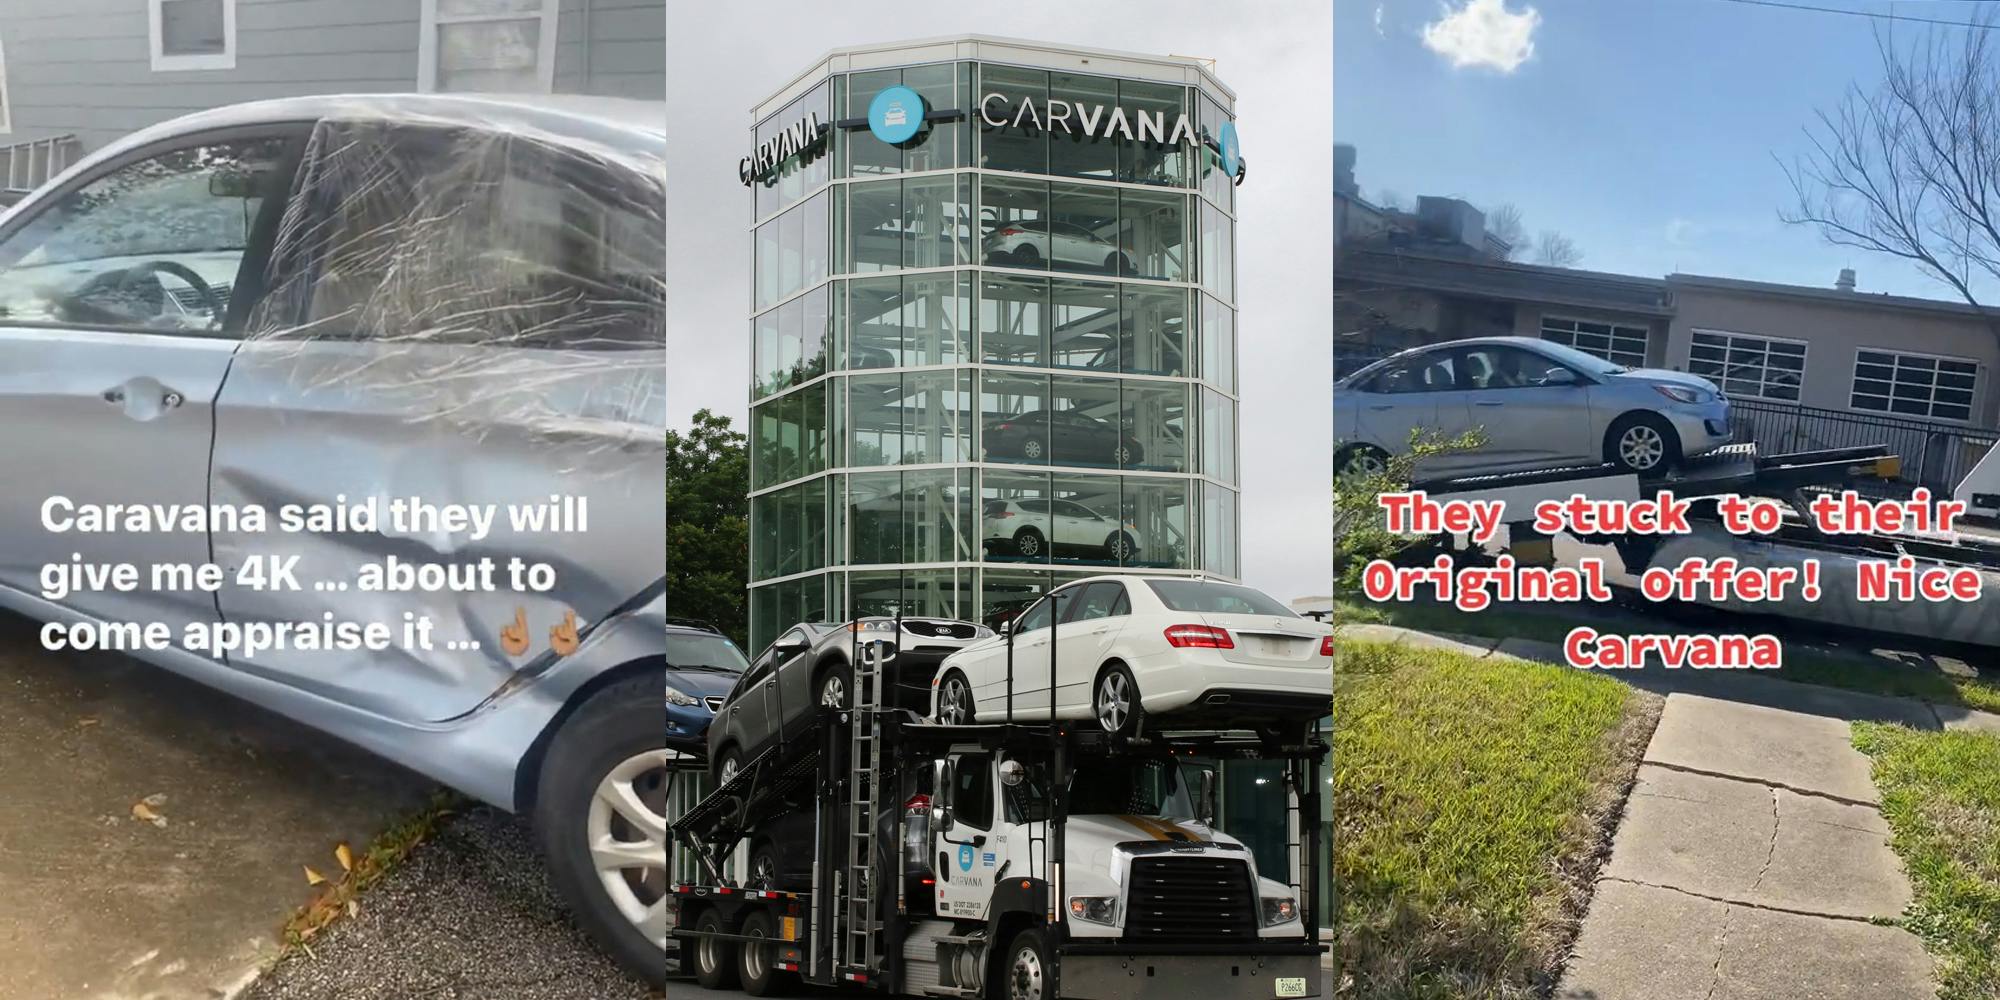 damaged car in driveway with caption "Carvana said they will give me 4k... about to come appraise it..." (l) Carvana sign on building with cars on tow (c) car on tow with caption "They stuck to their original offer! Nice Carvana" (r)